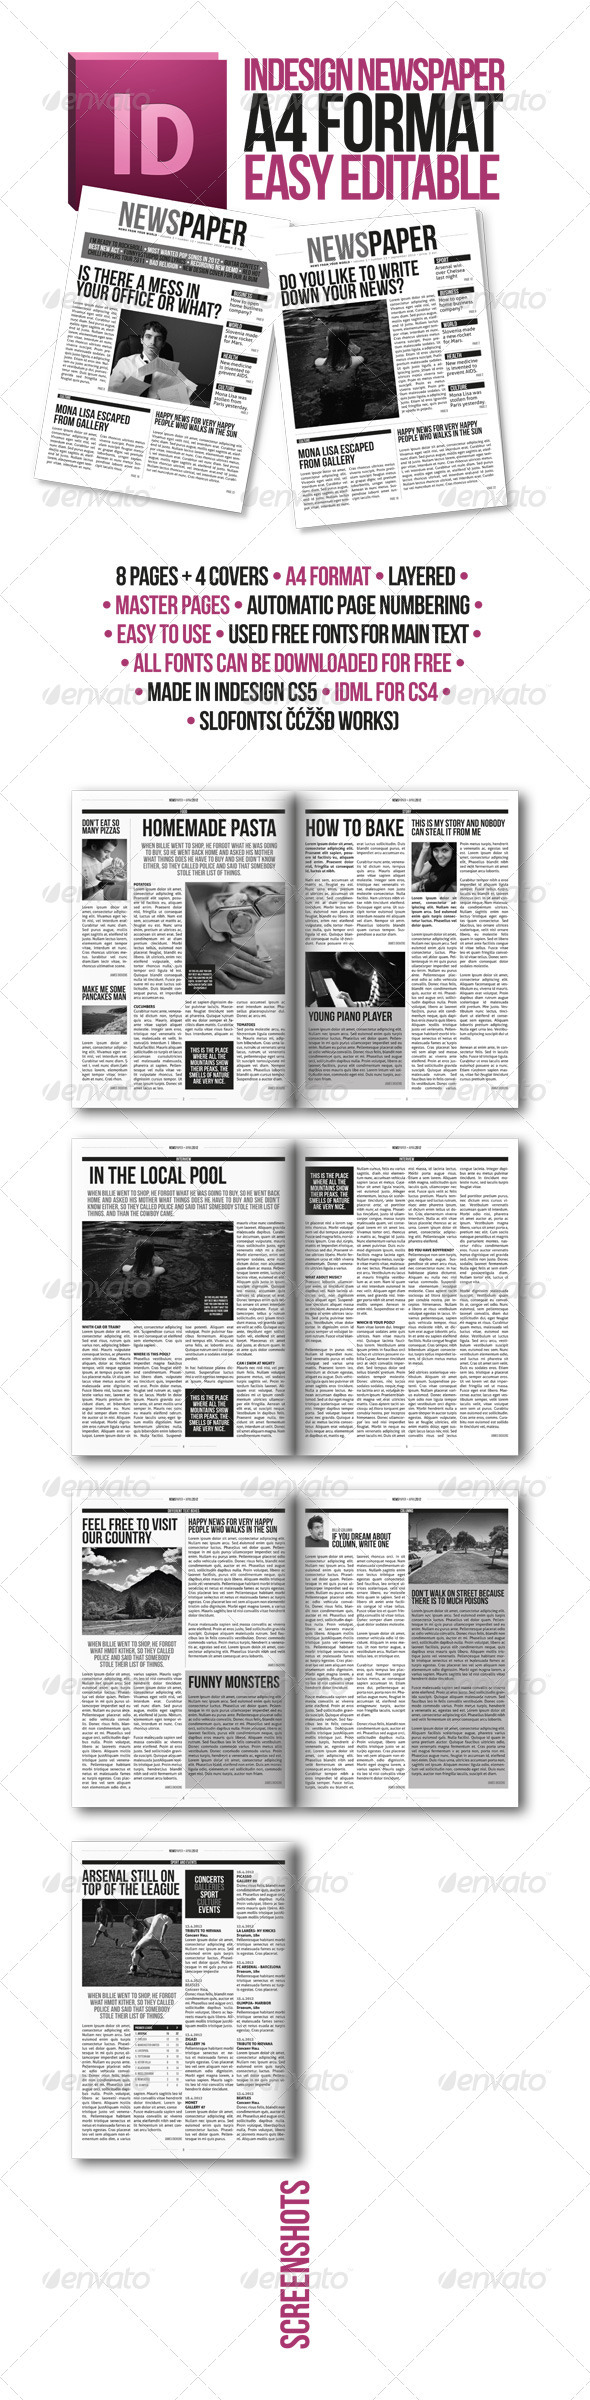 Newspaper Layout Indesign